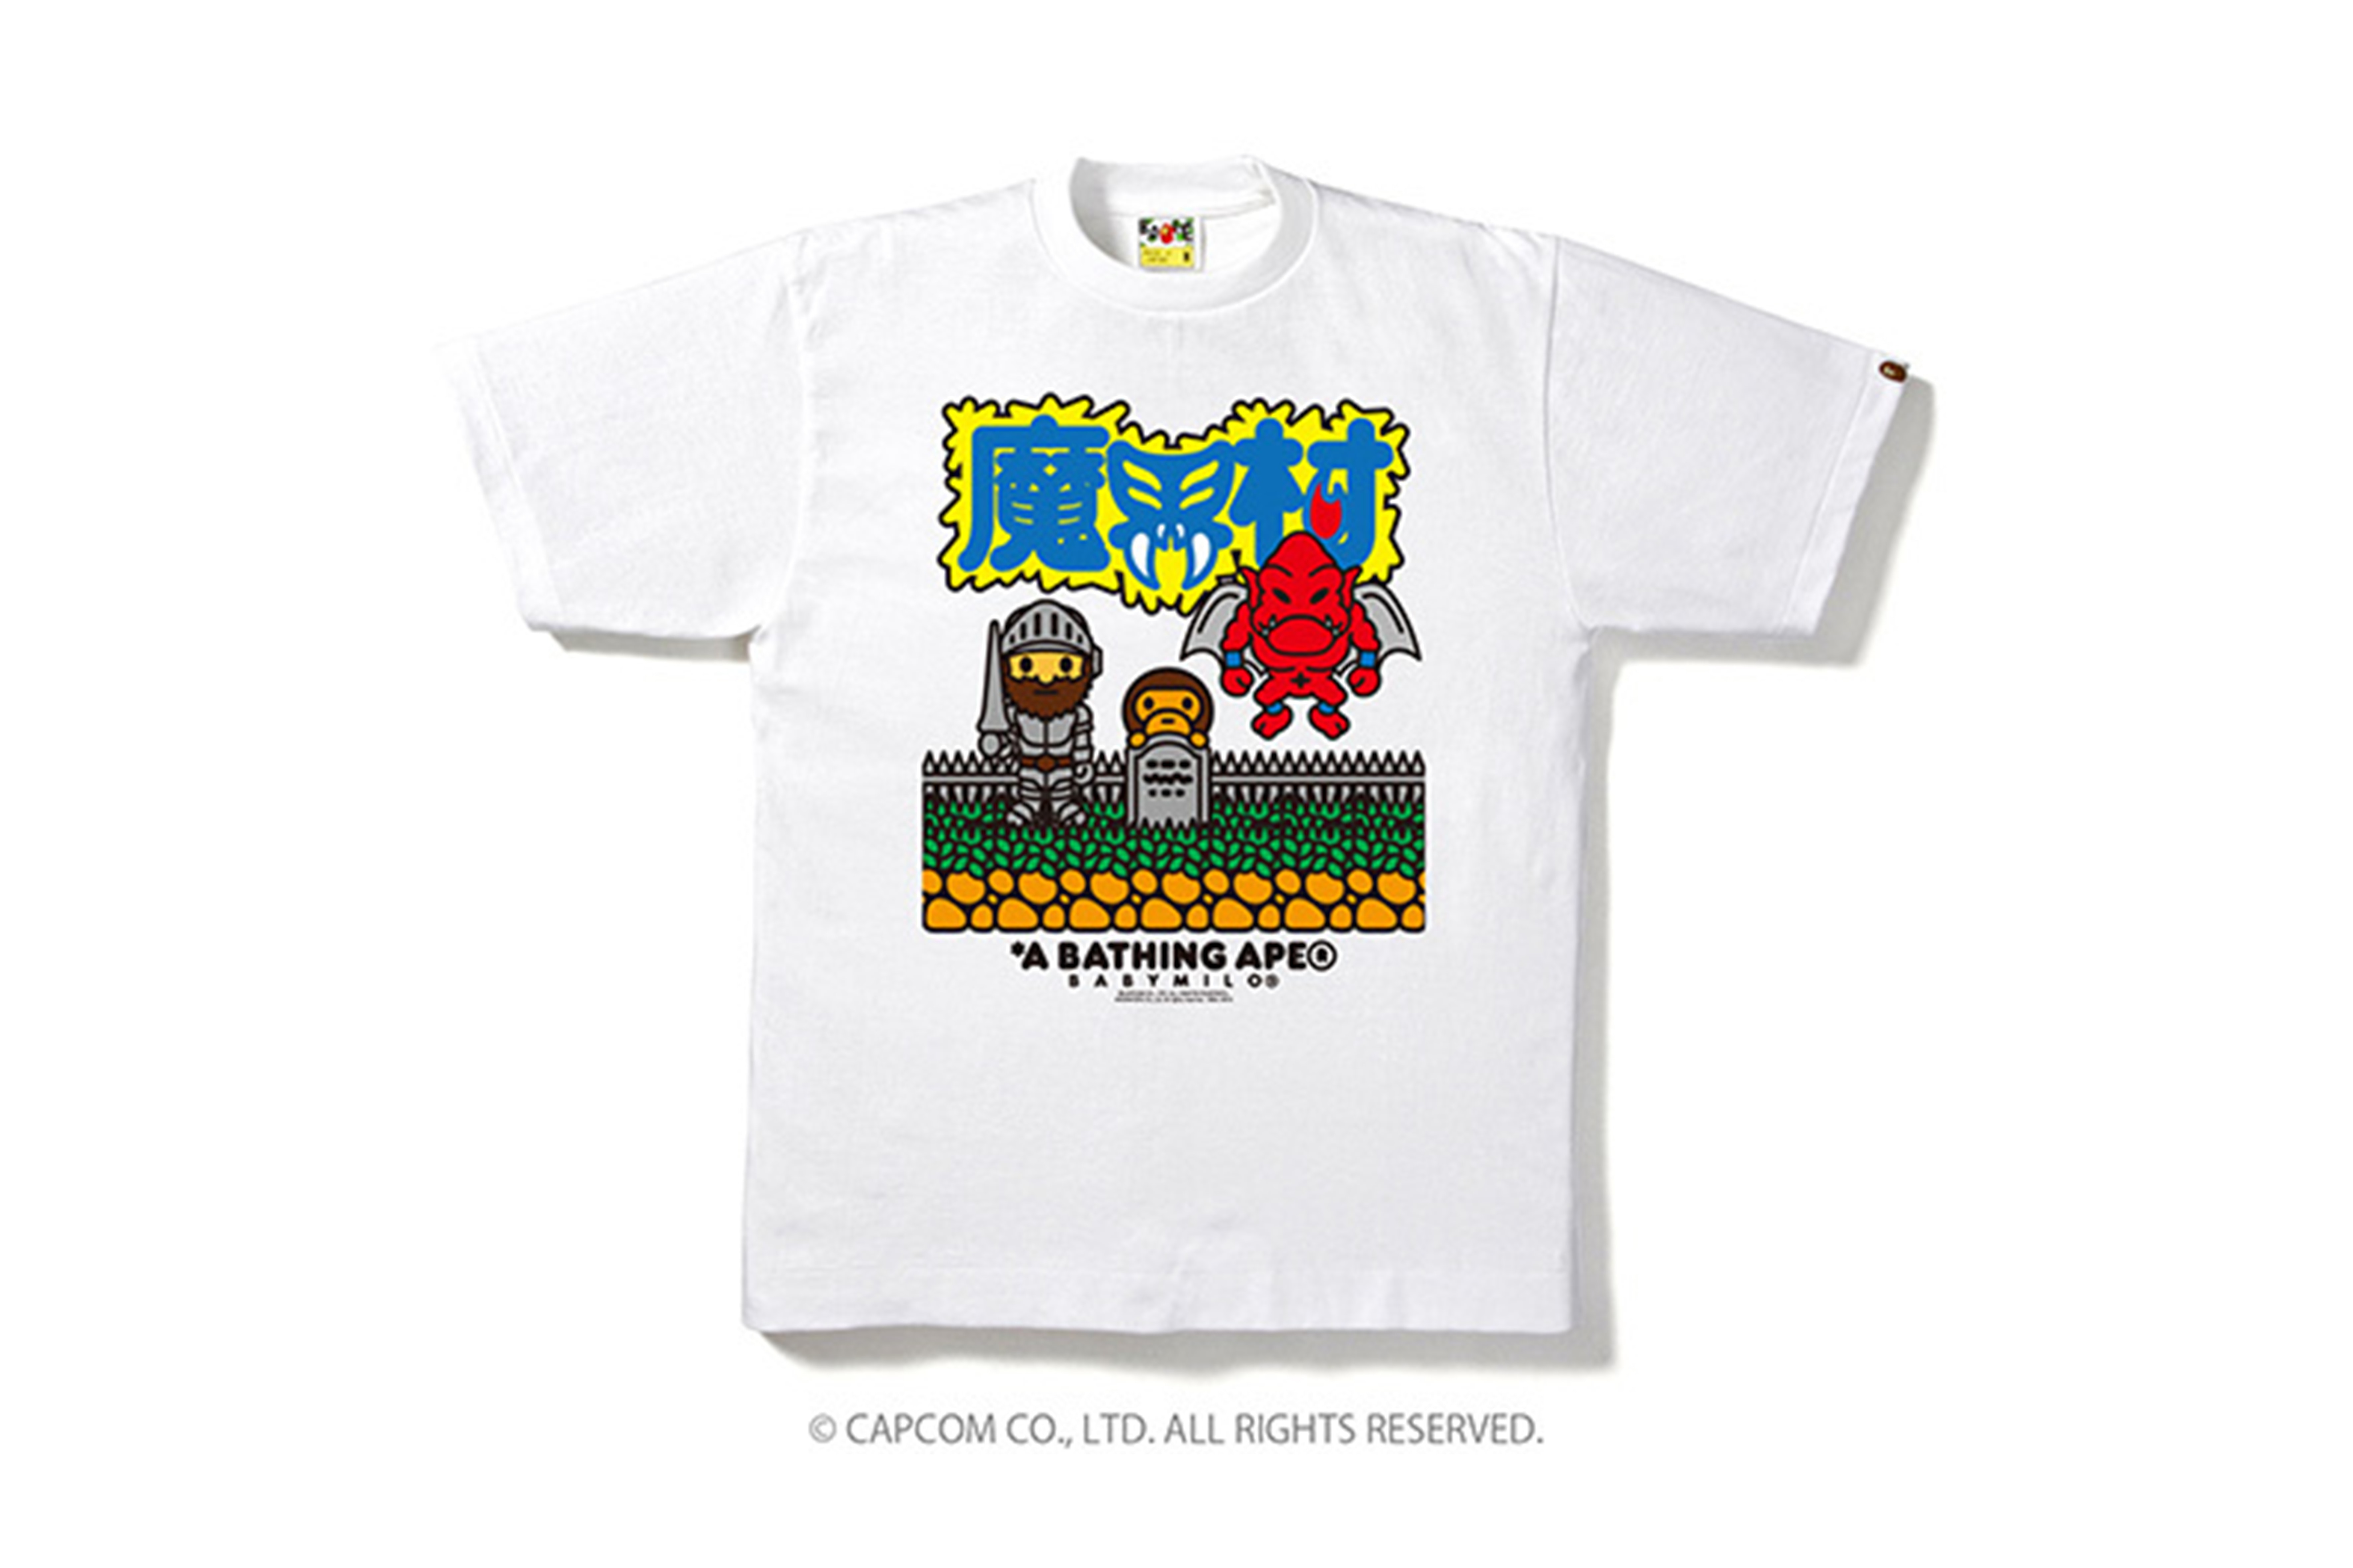 the collaboration between a bathing ape and capcom